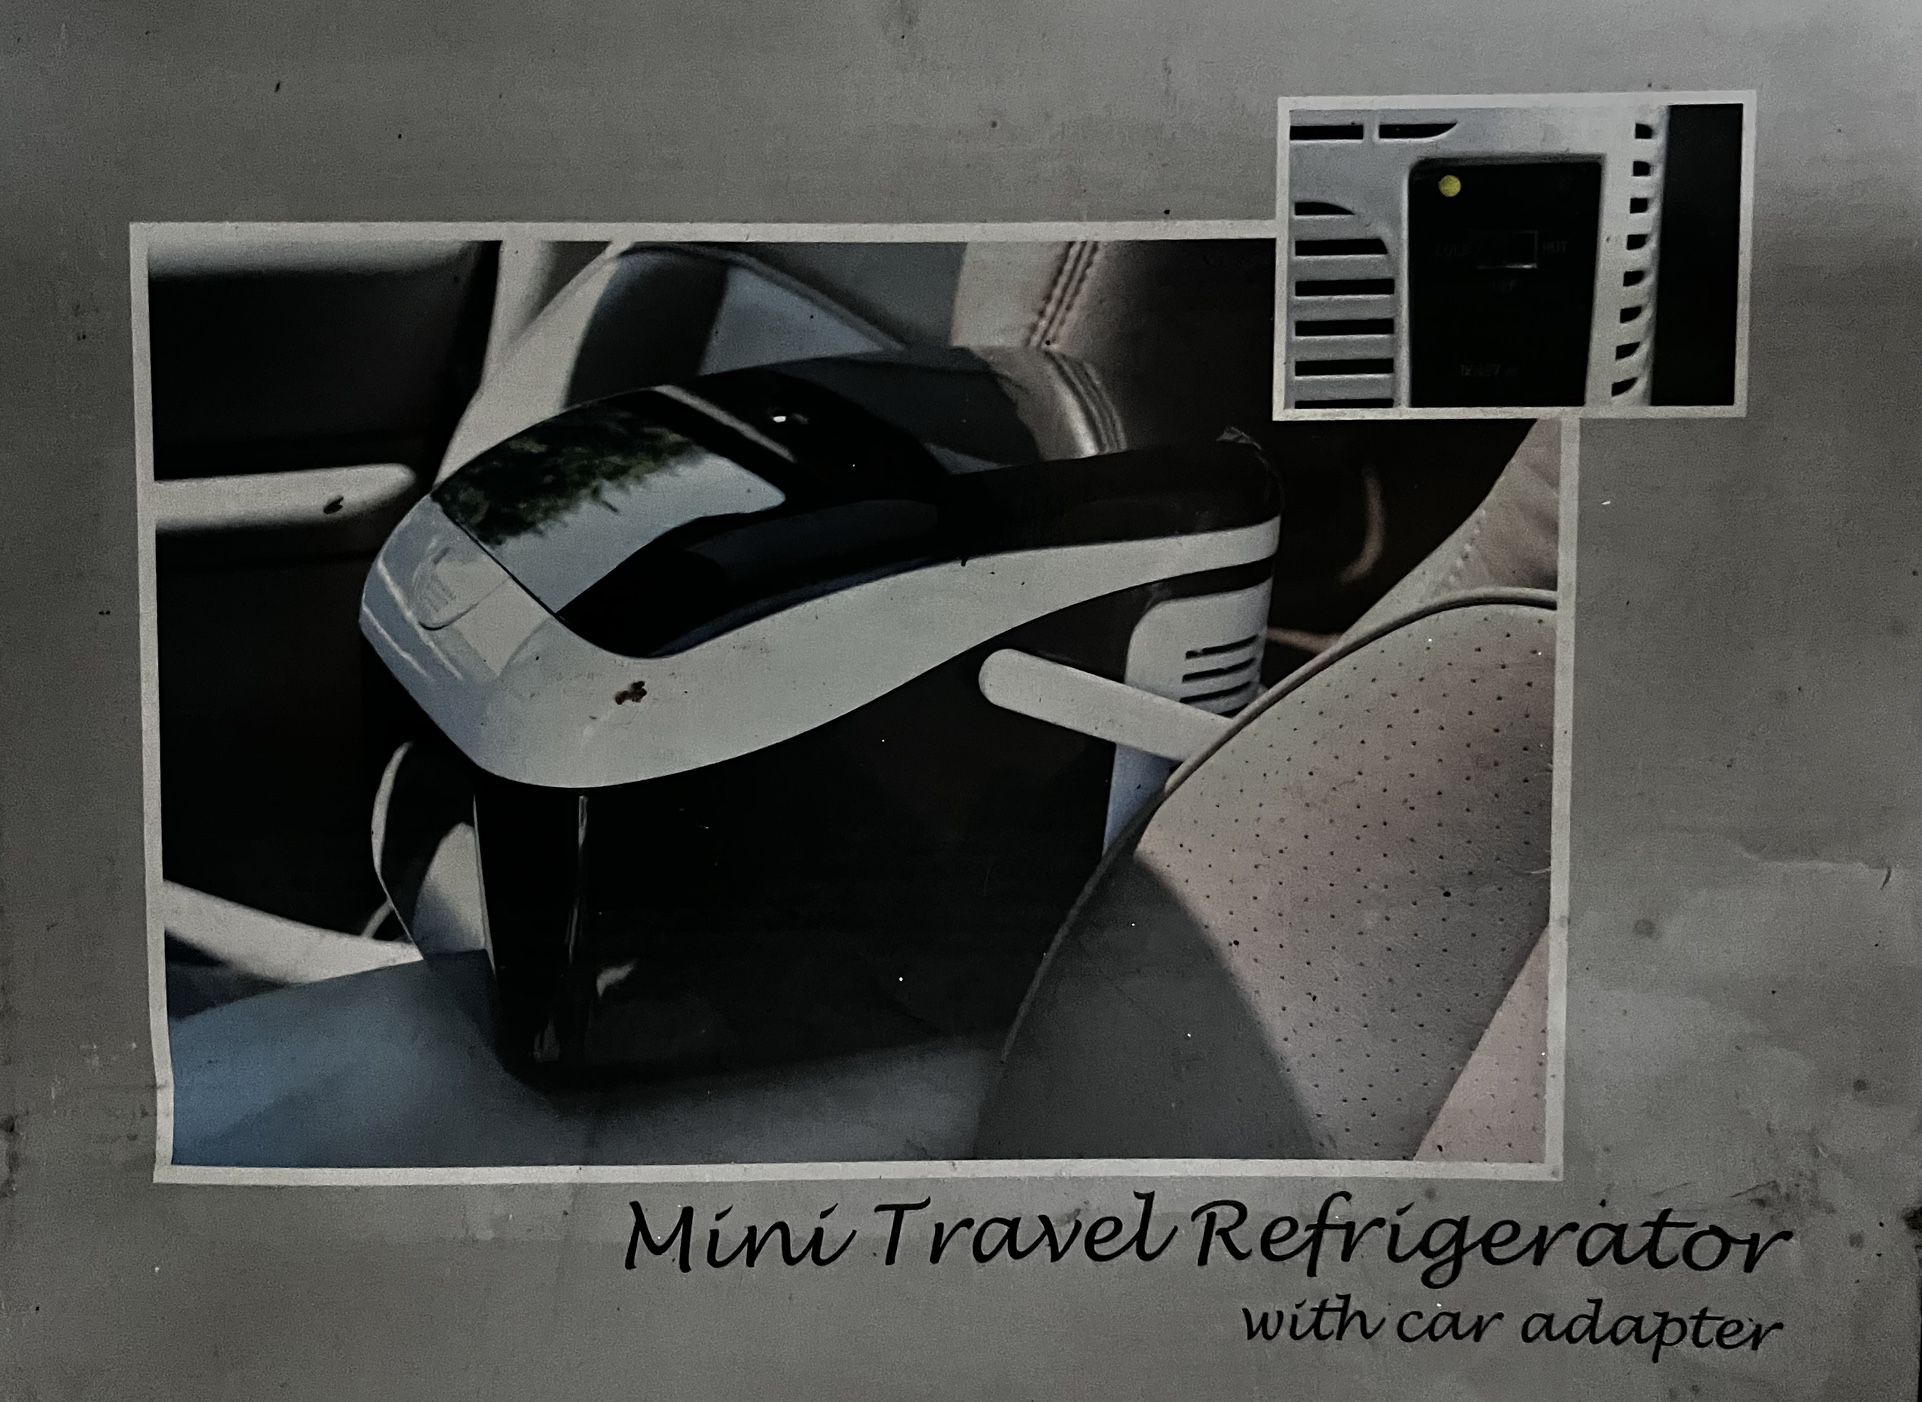 Mini travel refrigerator with car adapter